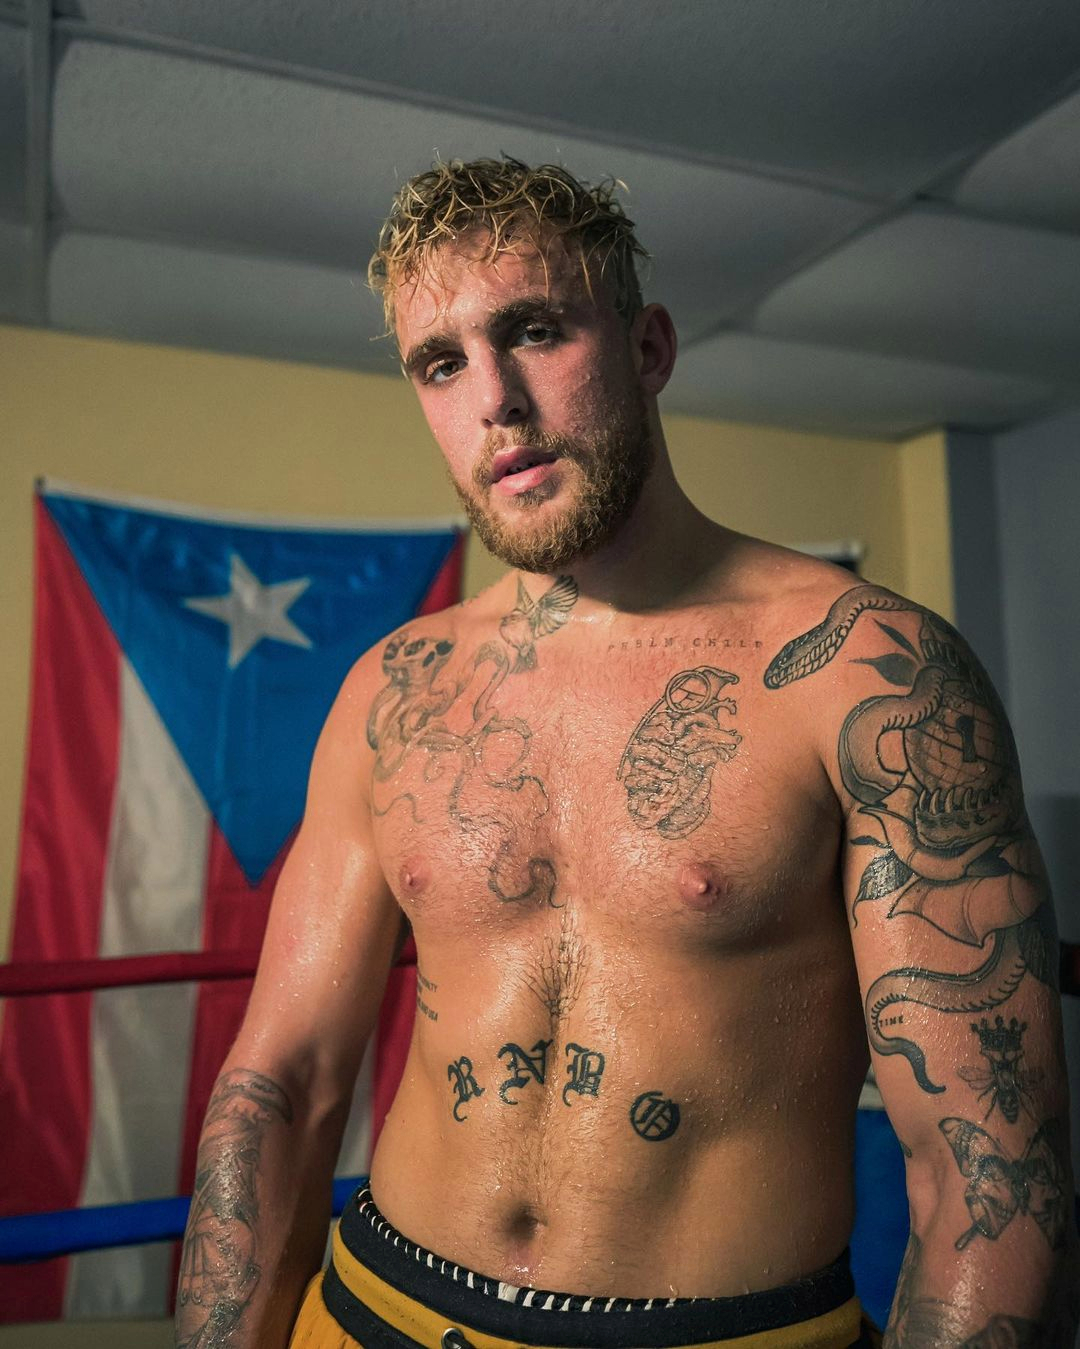 Jake Paul warns Conor McGregor that it's over, but the YouTuber states, 'I don’t think his ego could possibly accept that'